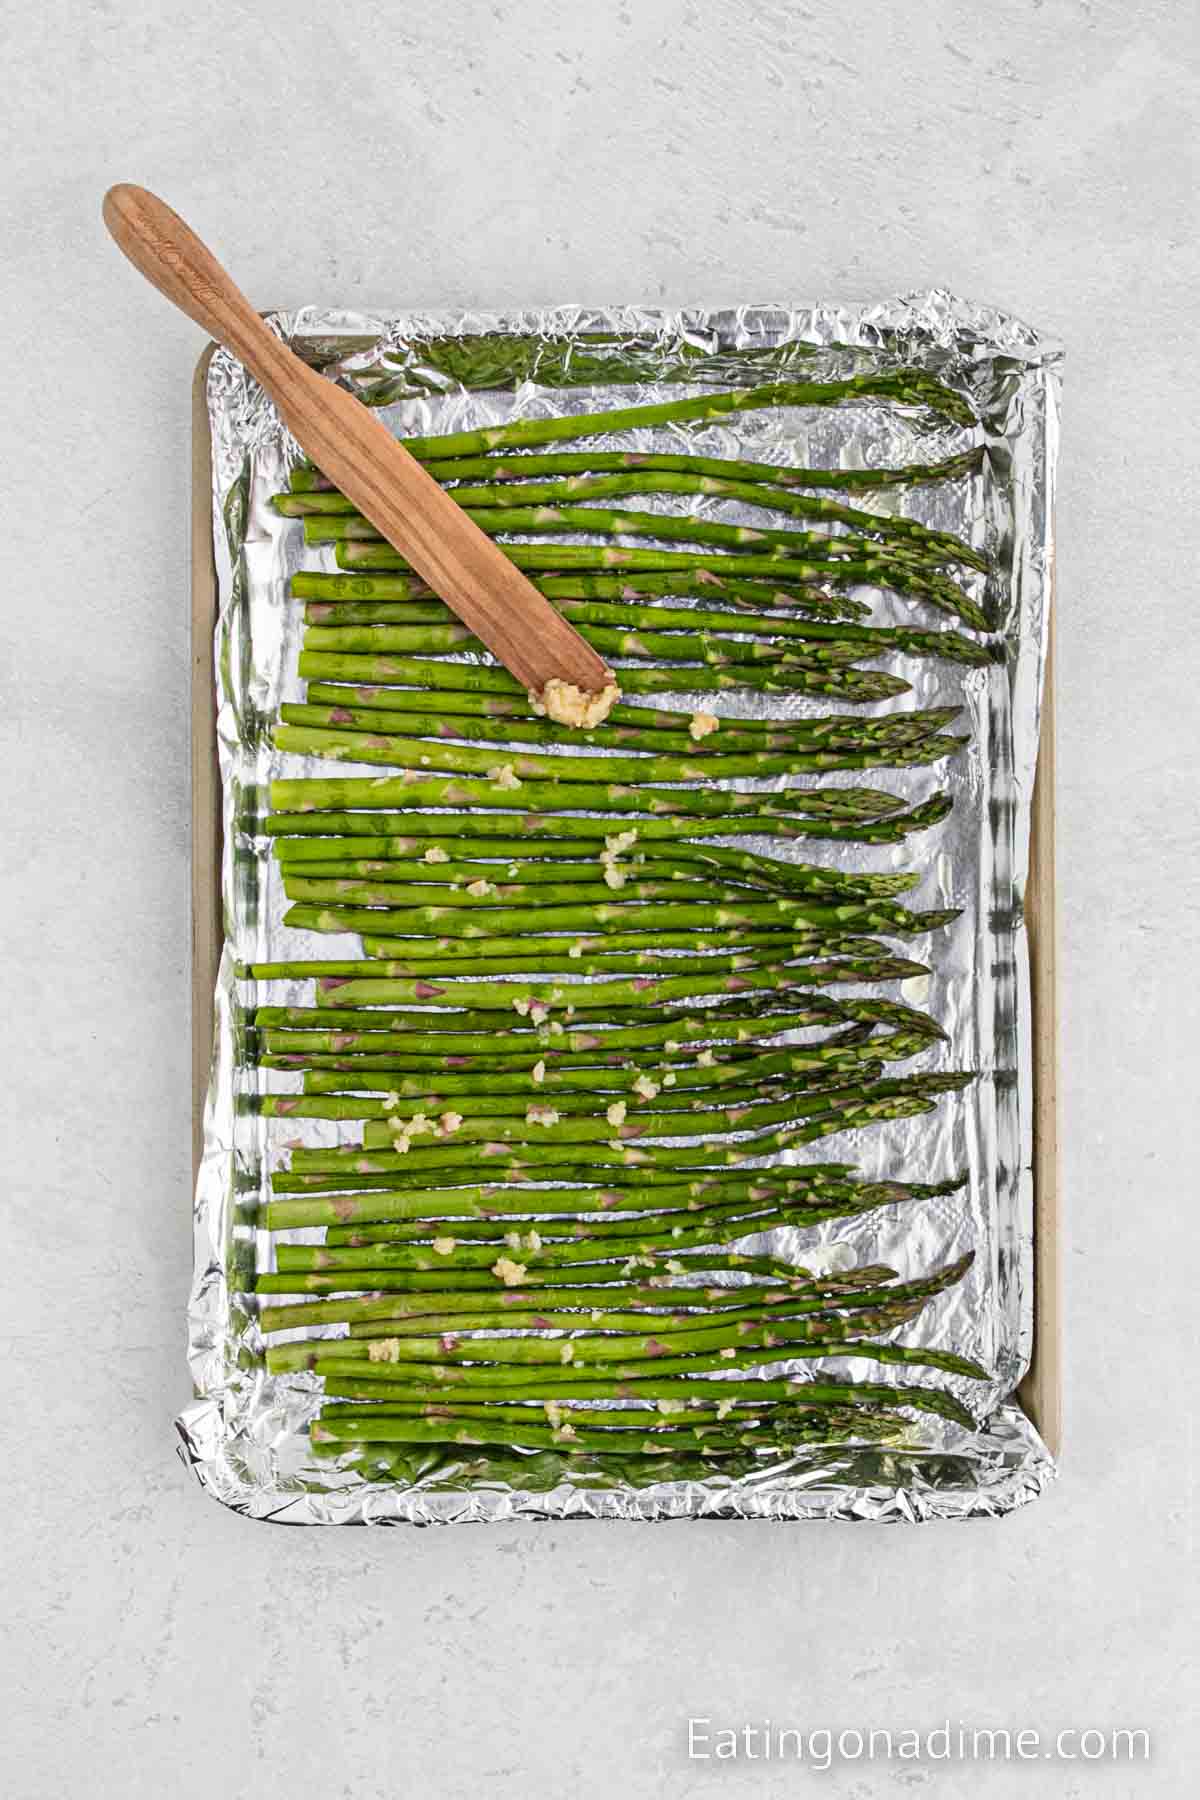 Topping the asparagus with minced garlic on the foil lined baking sheet